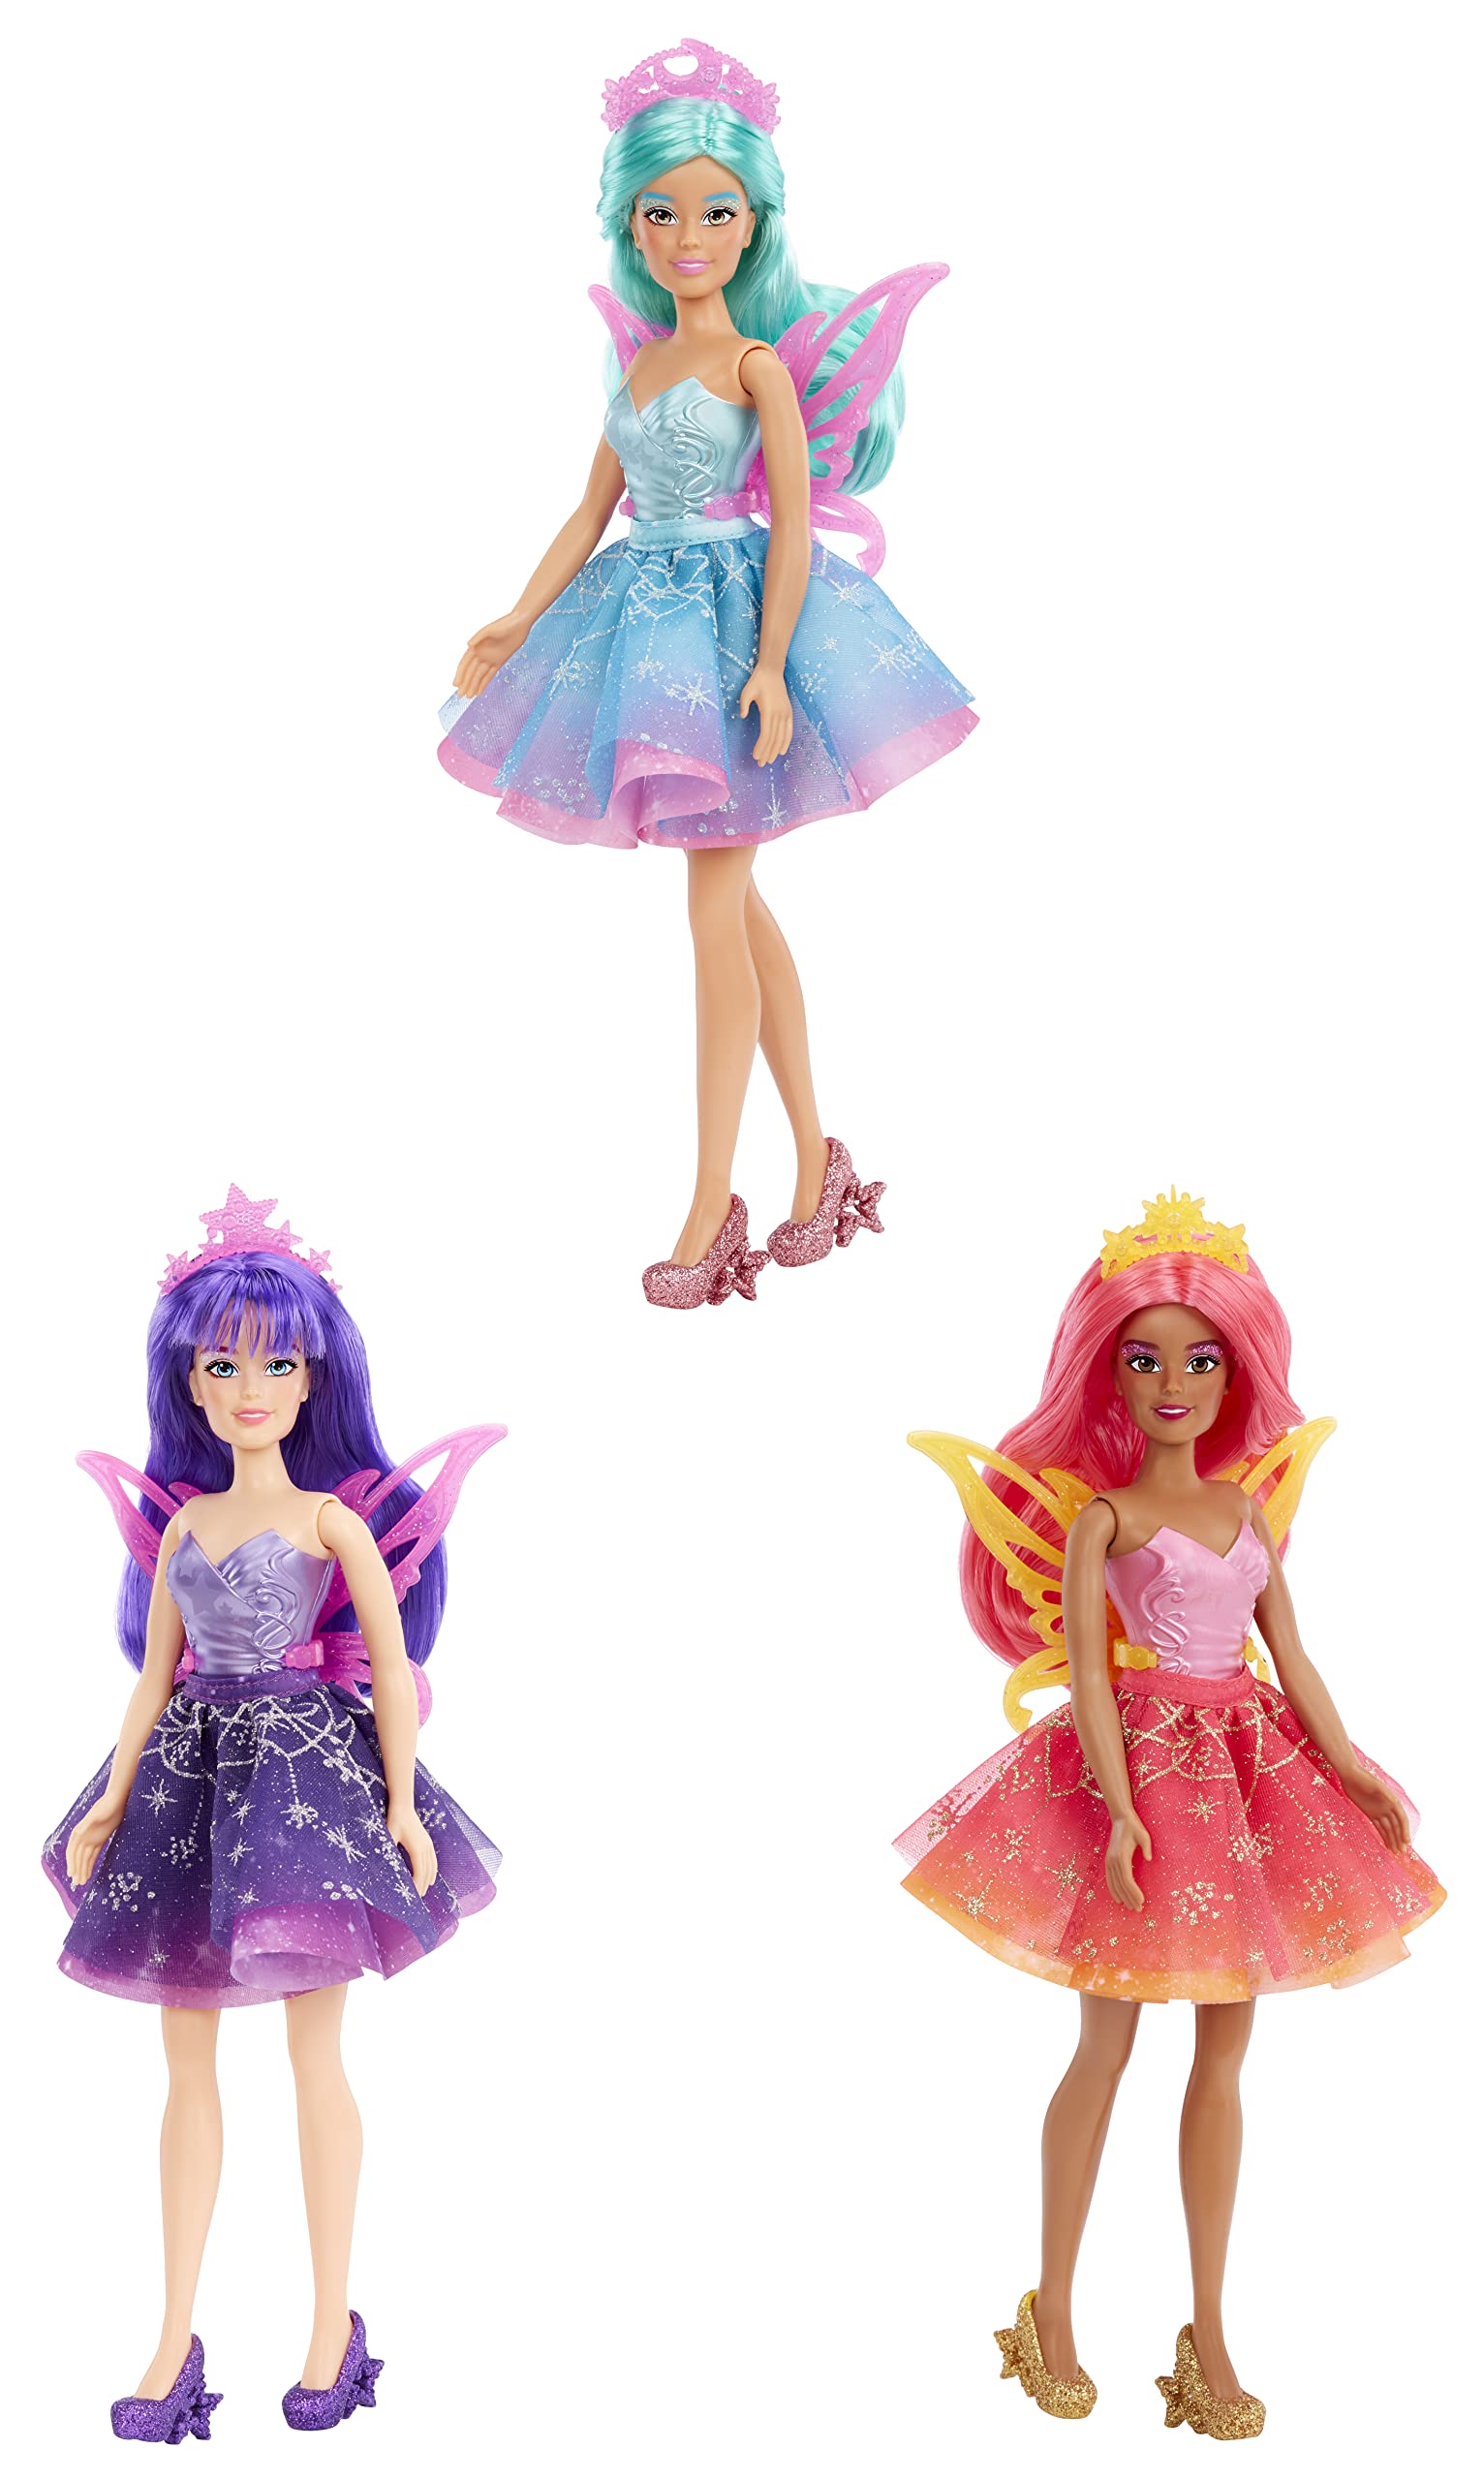 MGA Entertainment Dream Ella Color Change Surprise Fairies Celestial Series Doll - Aria, Star Inspired Fairy Fashion Doll with Iridescent Sparkly Wings, Tiara & Purple Hair, Multicolor (585114)